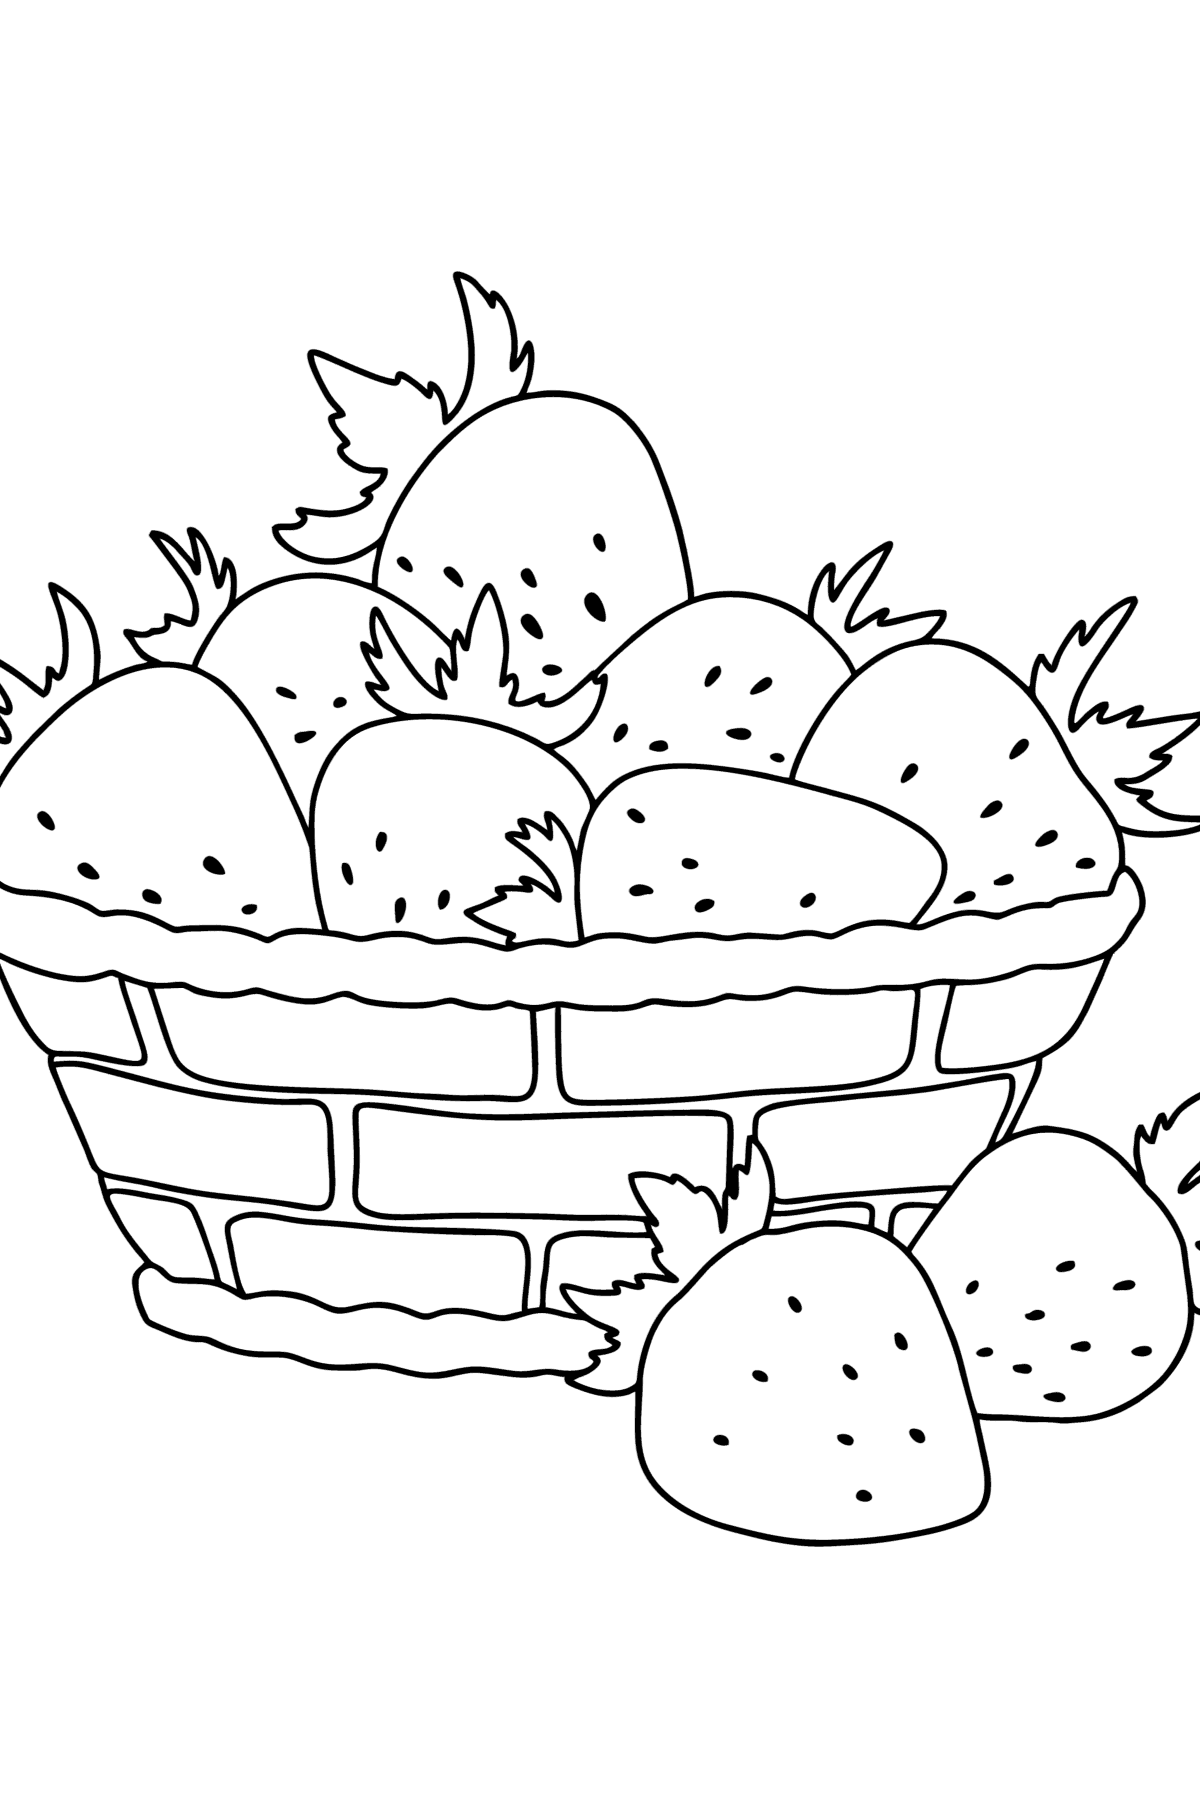 Strawberries in a basket сoloring page - Coloring Pages for Kids